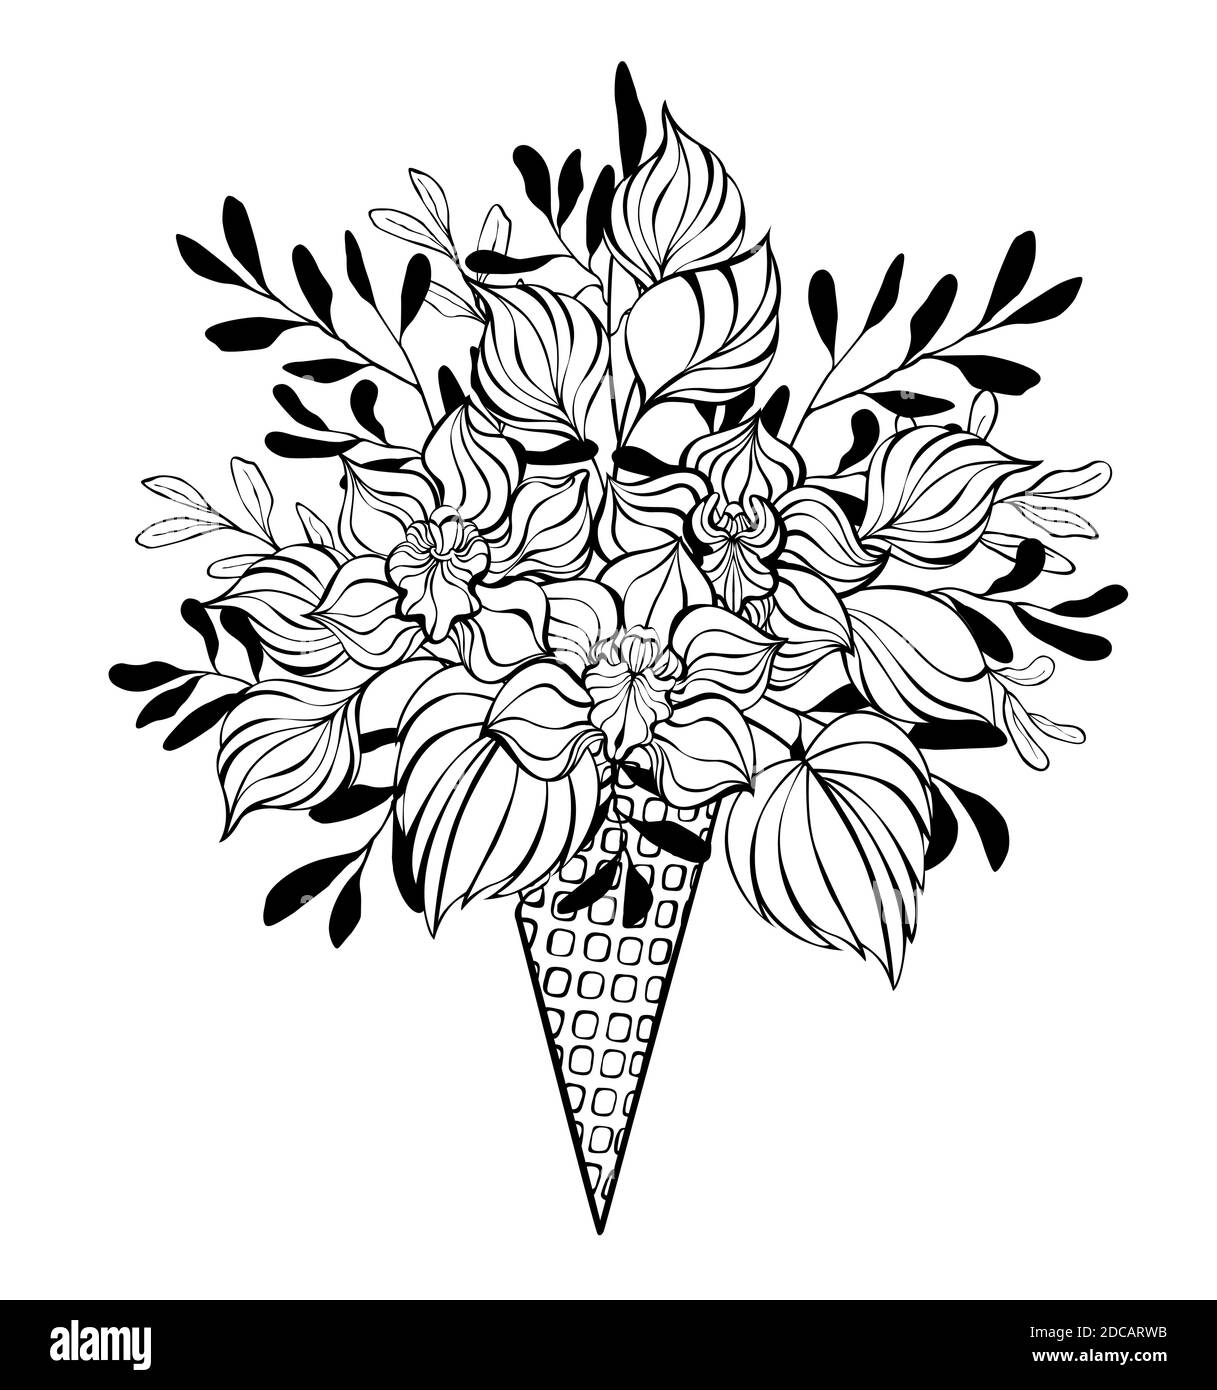 Contour waffle cone with bouquet of artistic, contour orchids and decorative plants drawn in black outline on white background. Coloring. Stock Vector